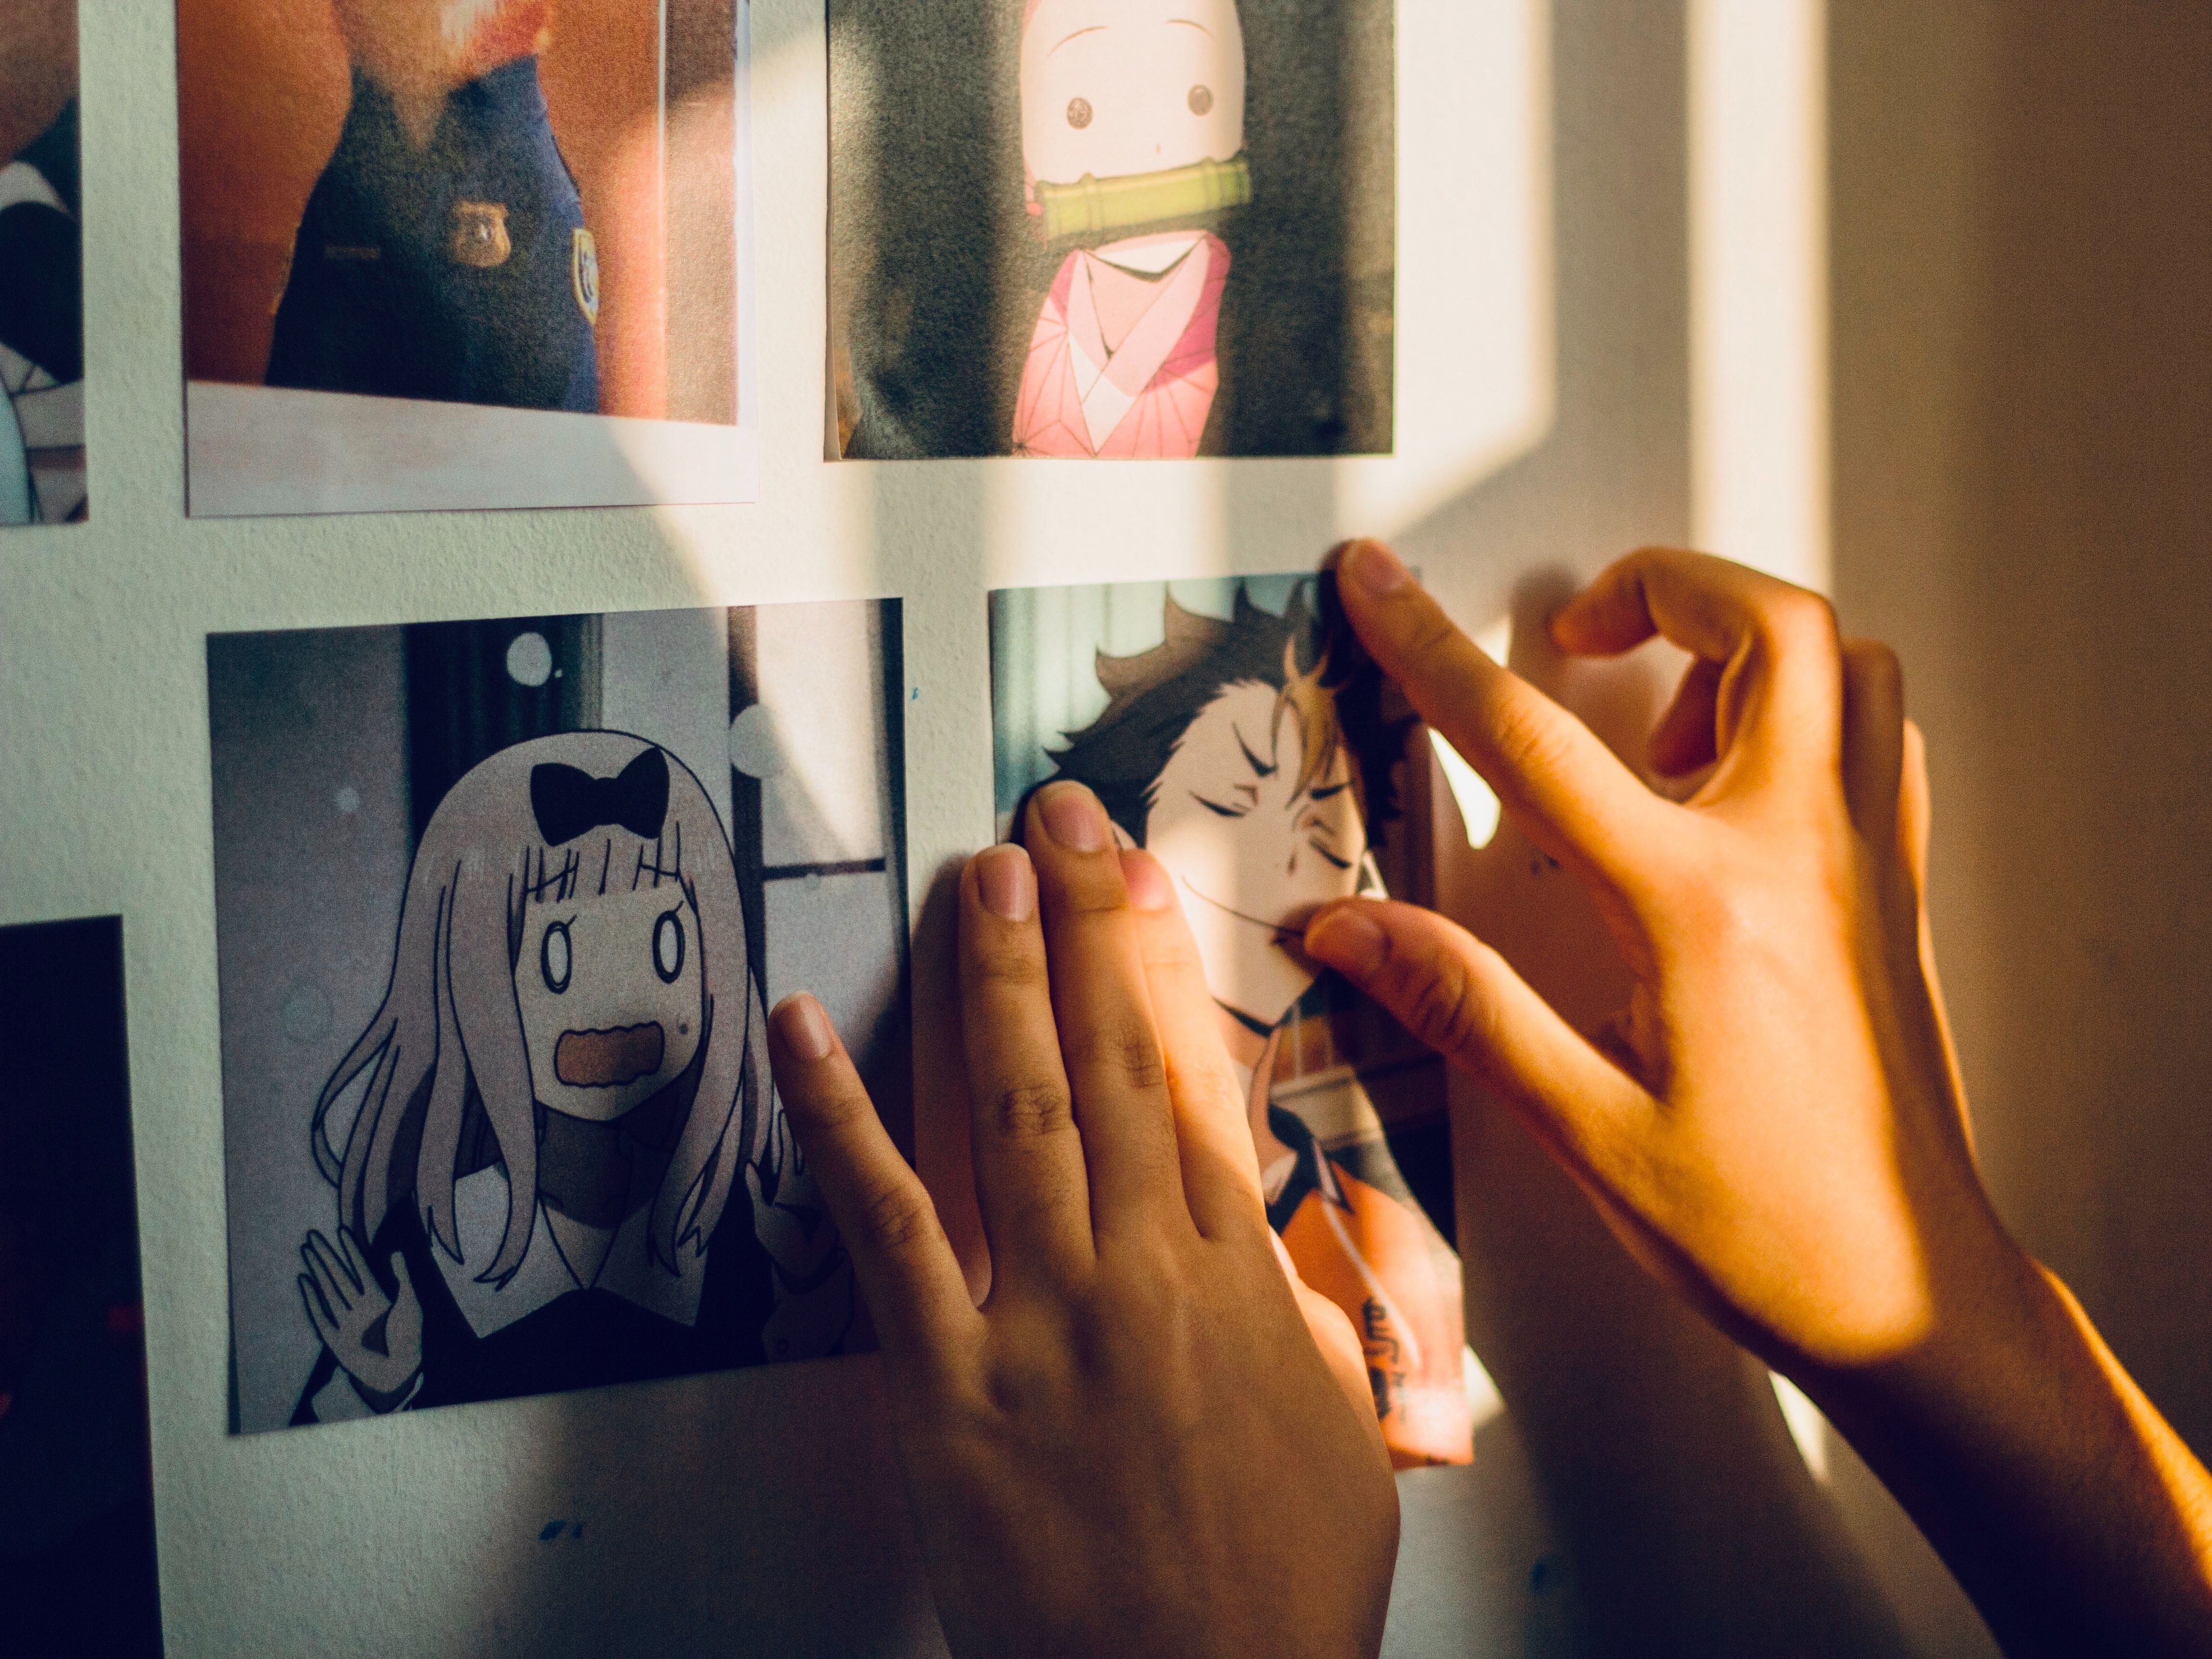 Two hands holding a printed manga cartoon up to a wall, beside a collage of different printed manga illustrations.Two hands holding a printed manga cartoon up to a wall, beside a collage of different printed manga illustrations.